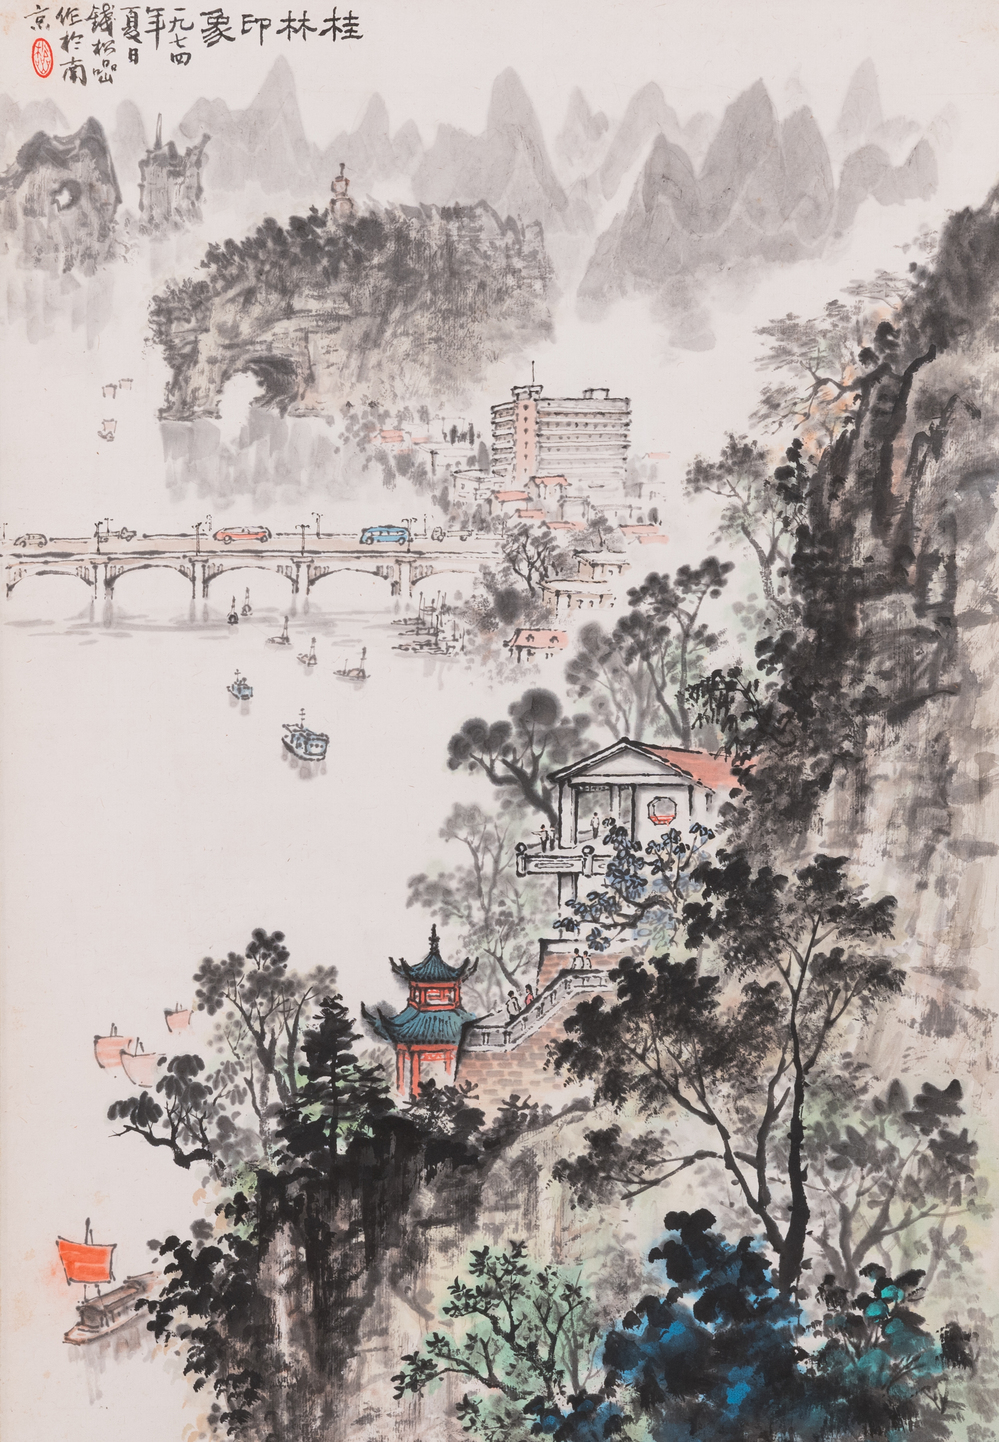 Qian Songyan 錢松嵒 (1899-1986): 'Landscape with modern buildings', ink and colour on paper, dated 1974